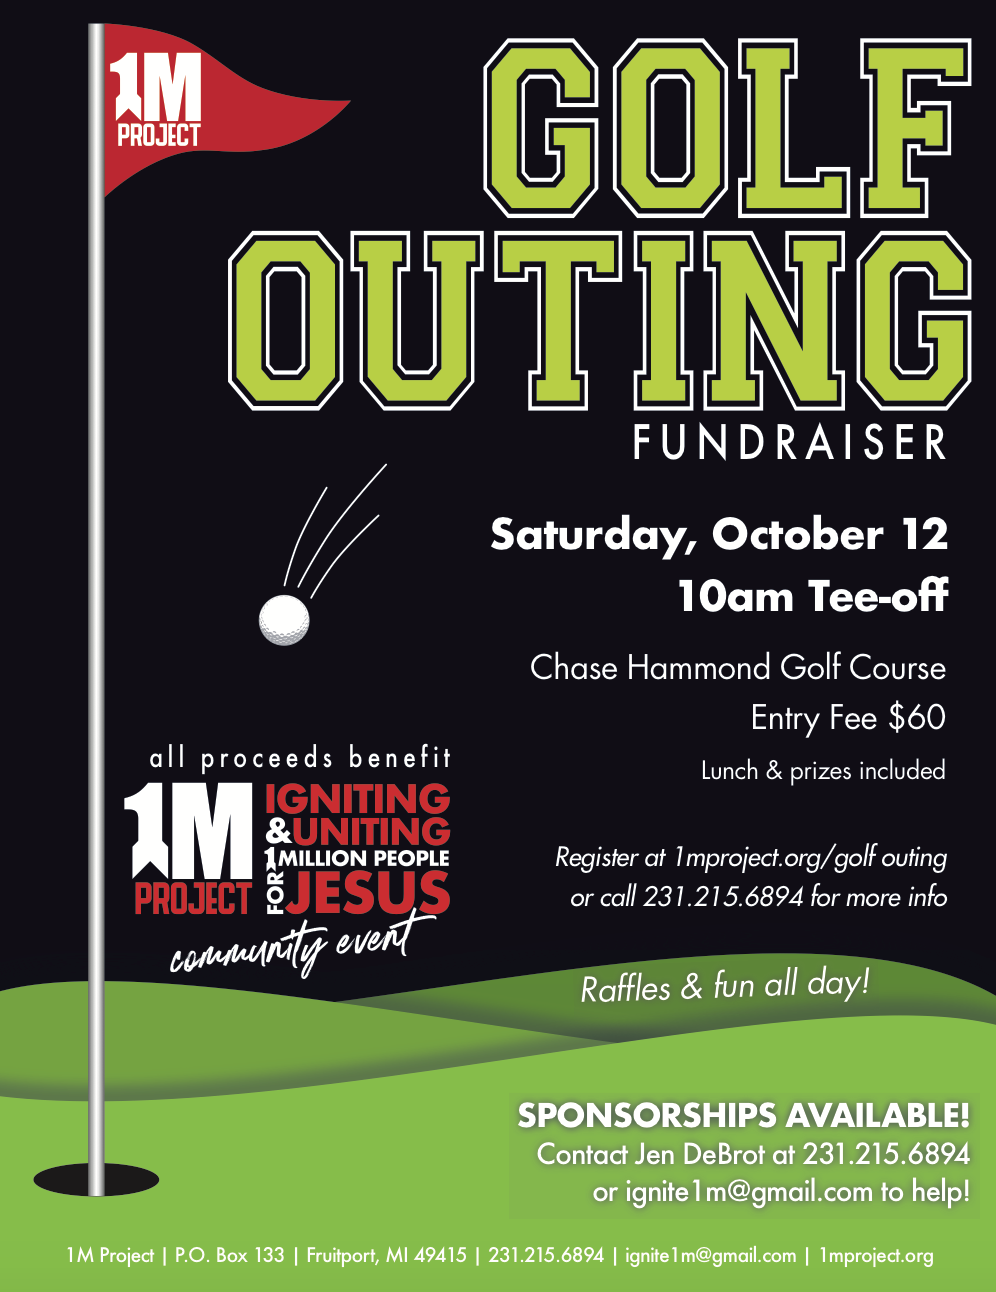 1M Project Golf Outing